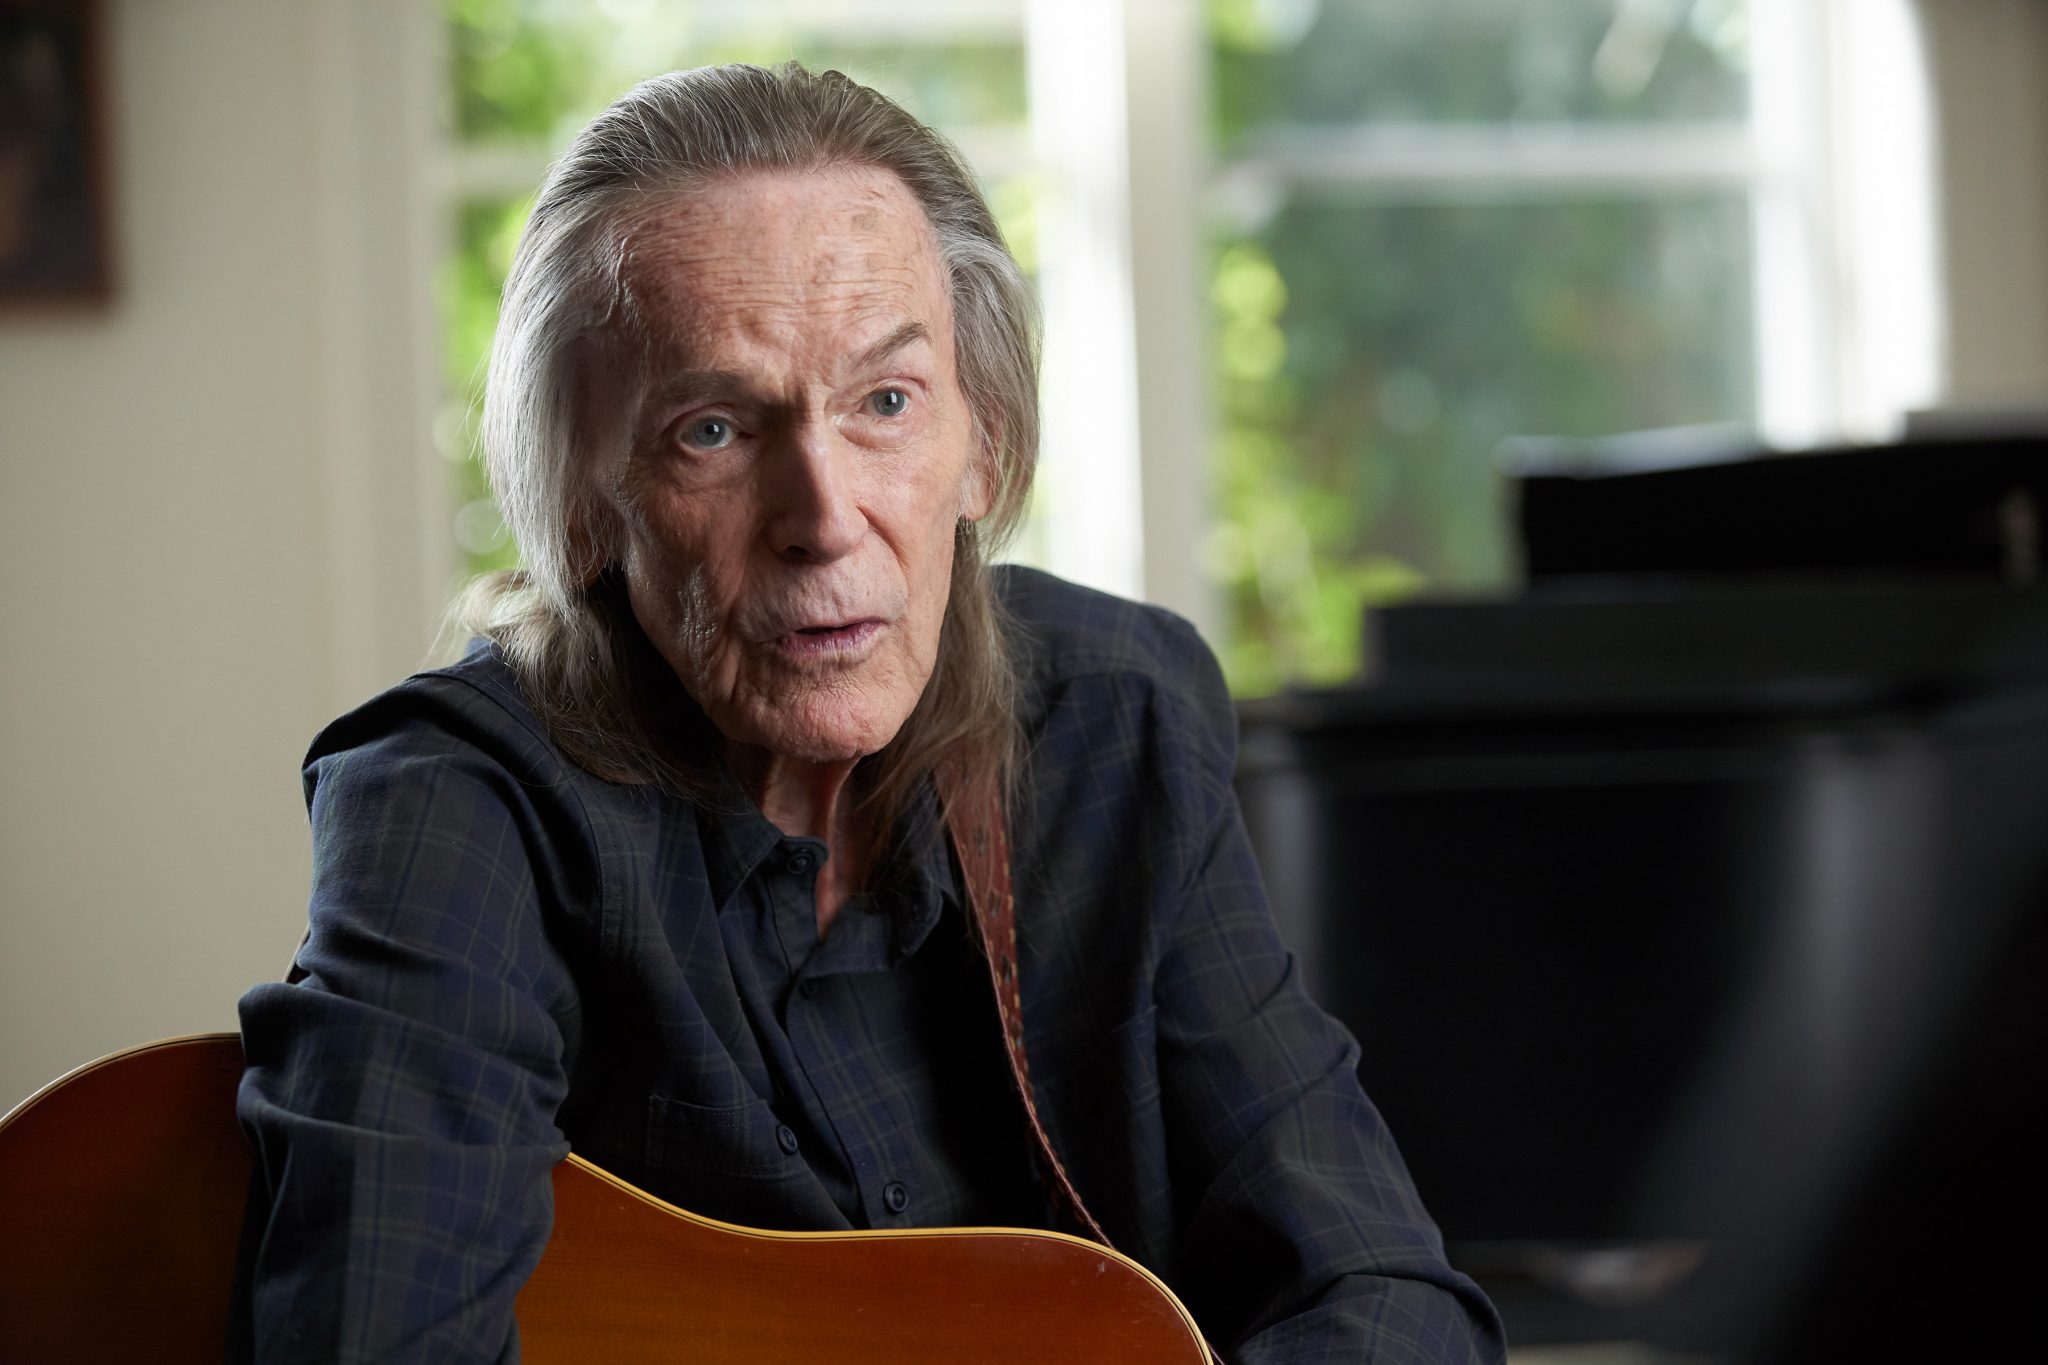 Gordon Lightfoot in "Gordon Lightfoot: If You Could read My Mind"...